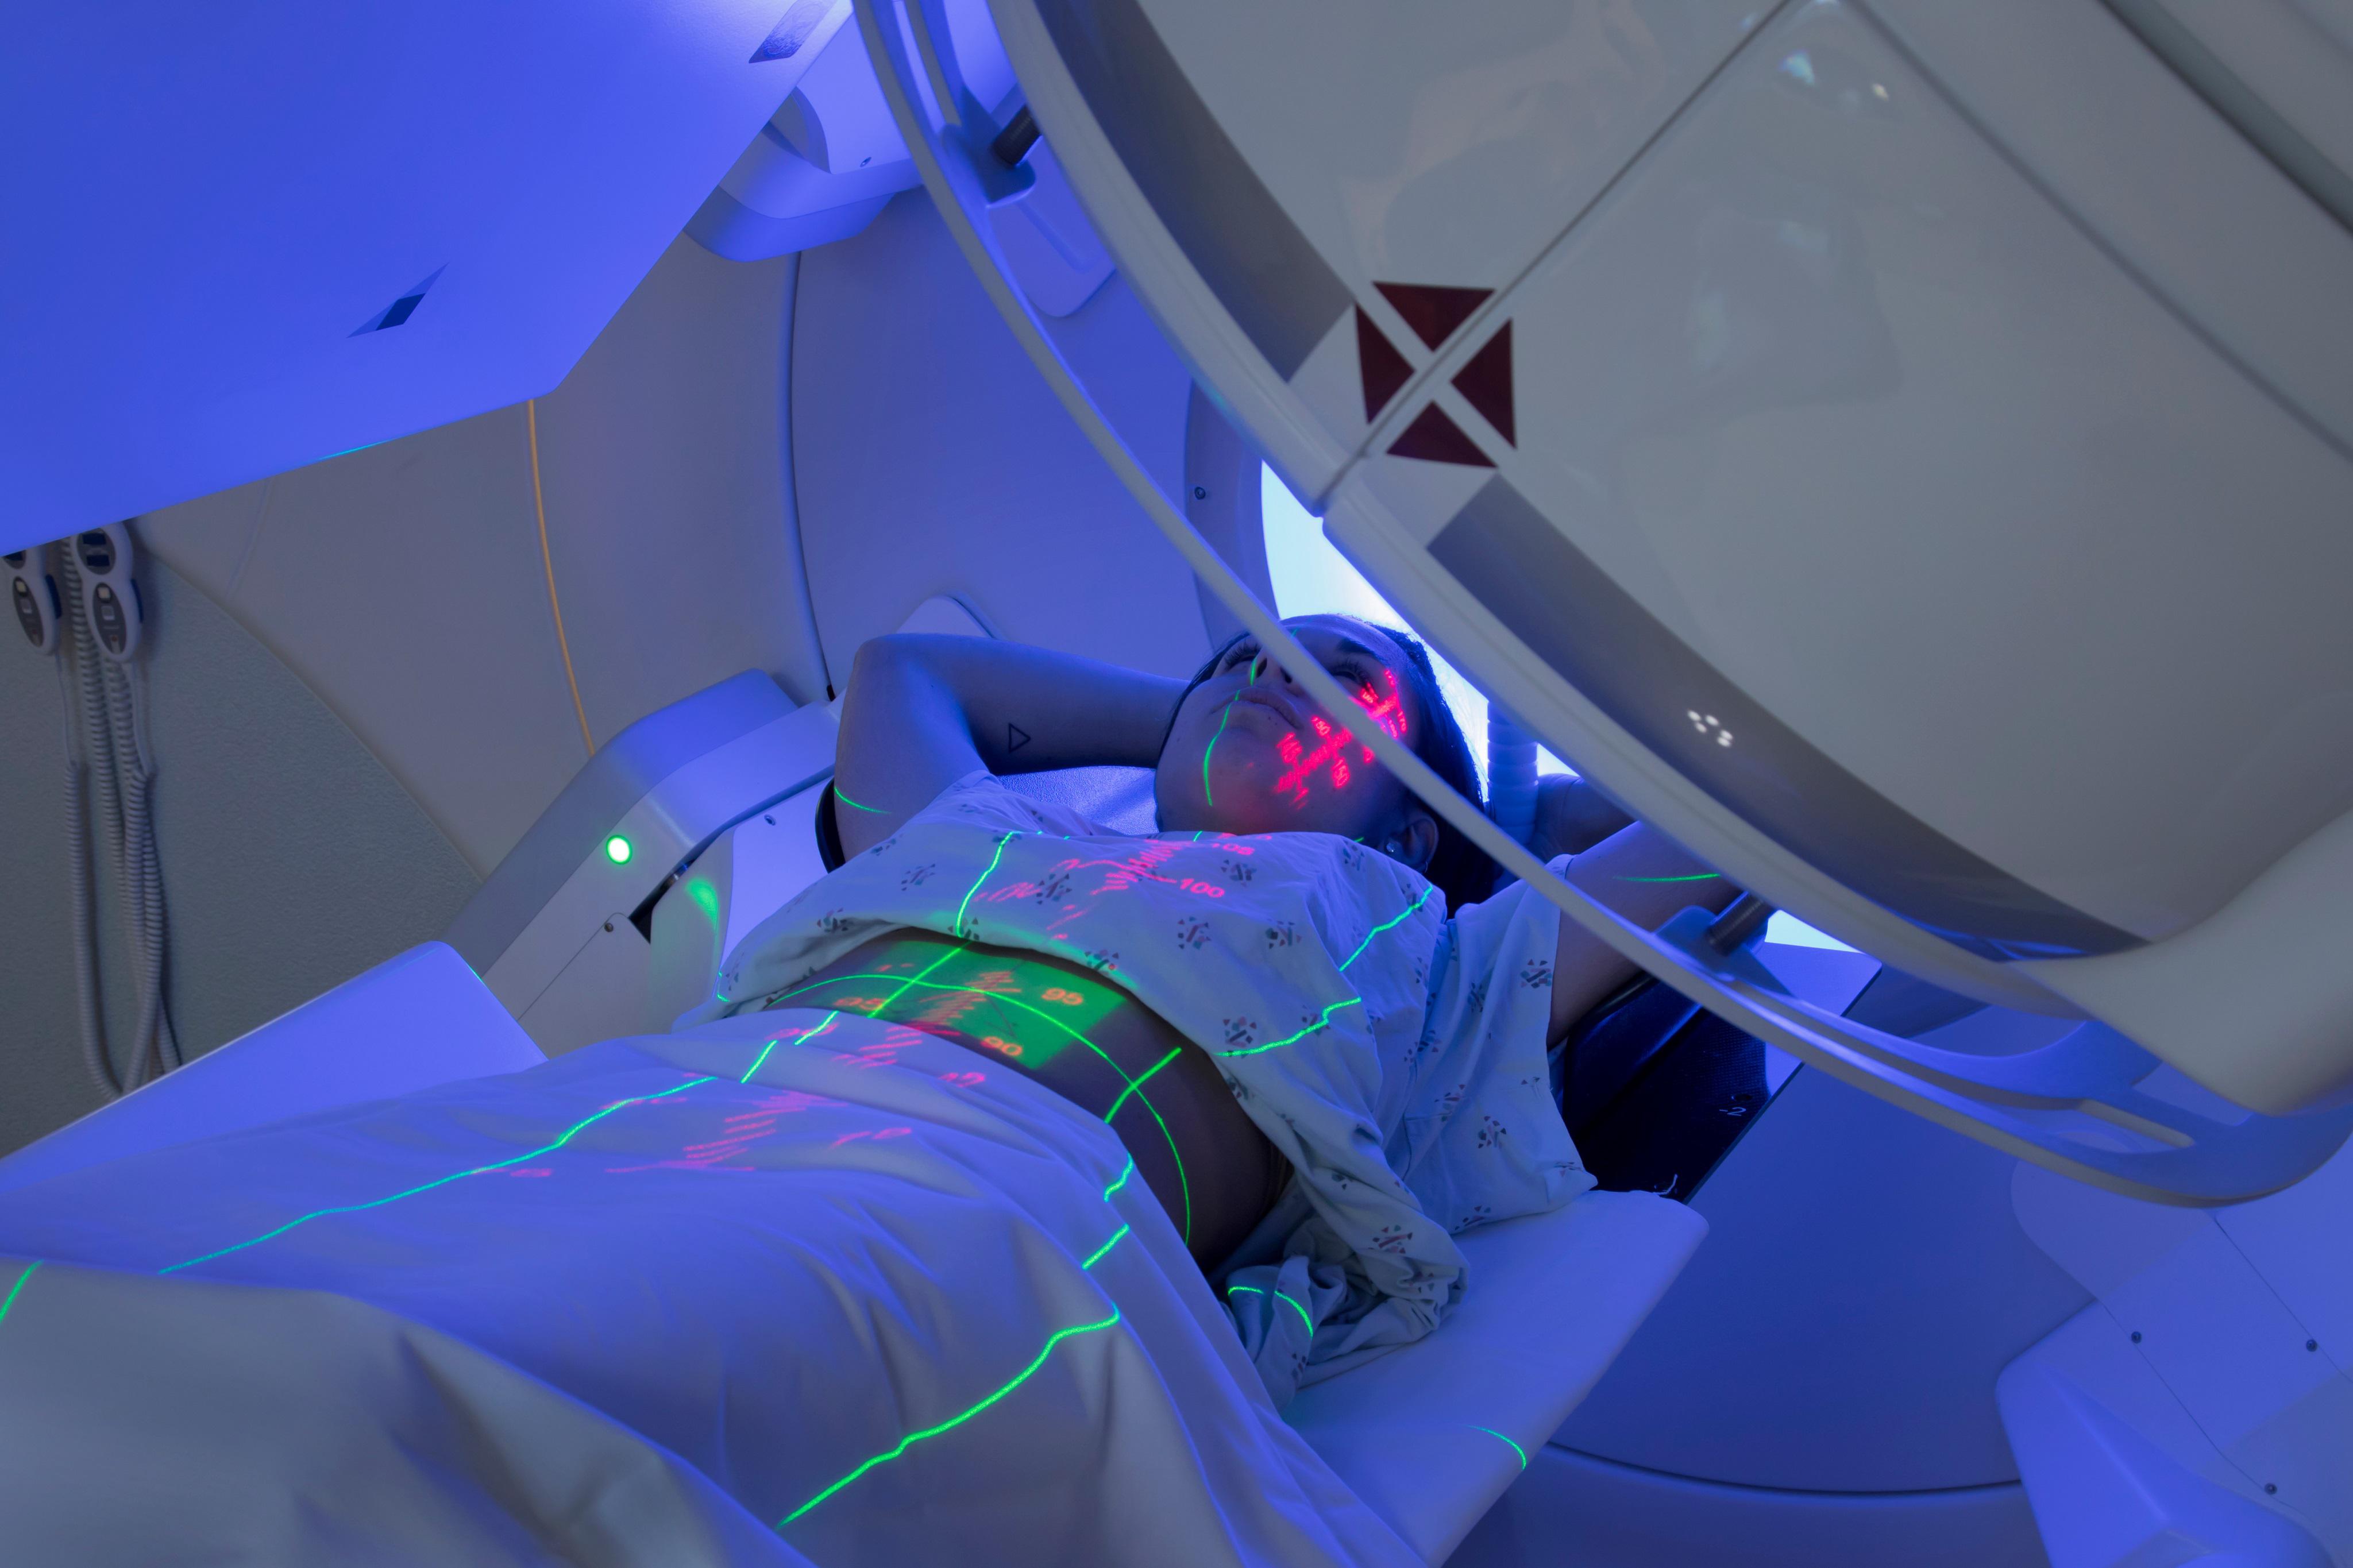 Radiation therapy, Definition, Types, & Side Effects